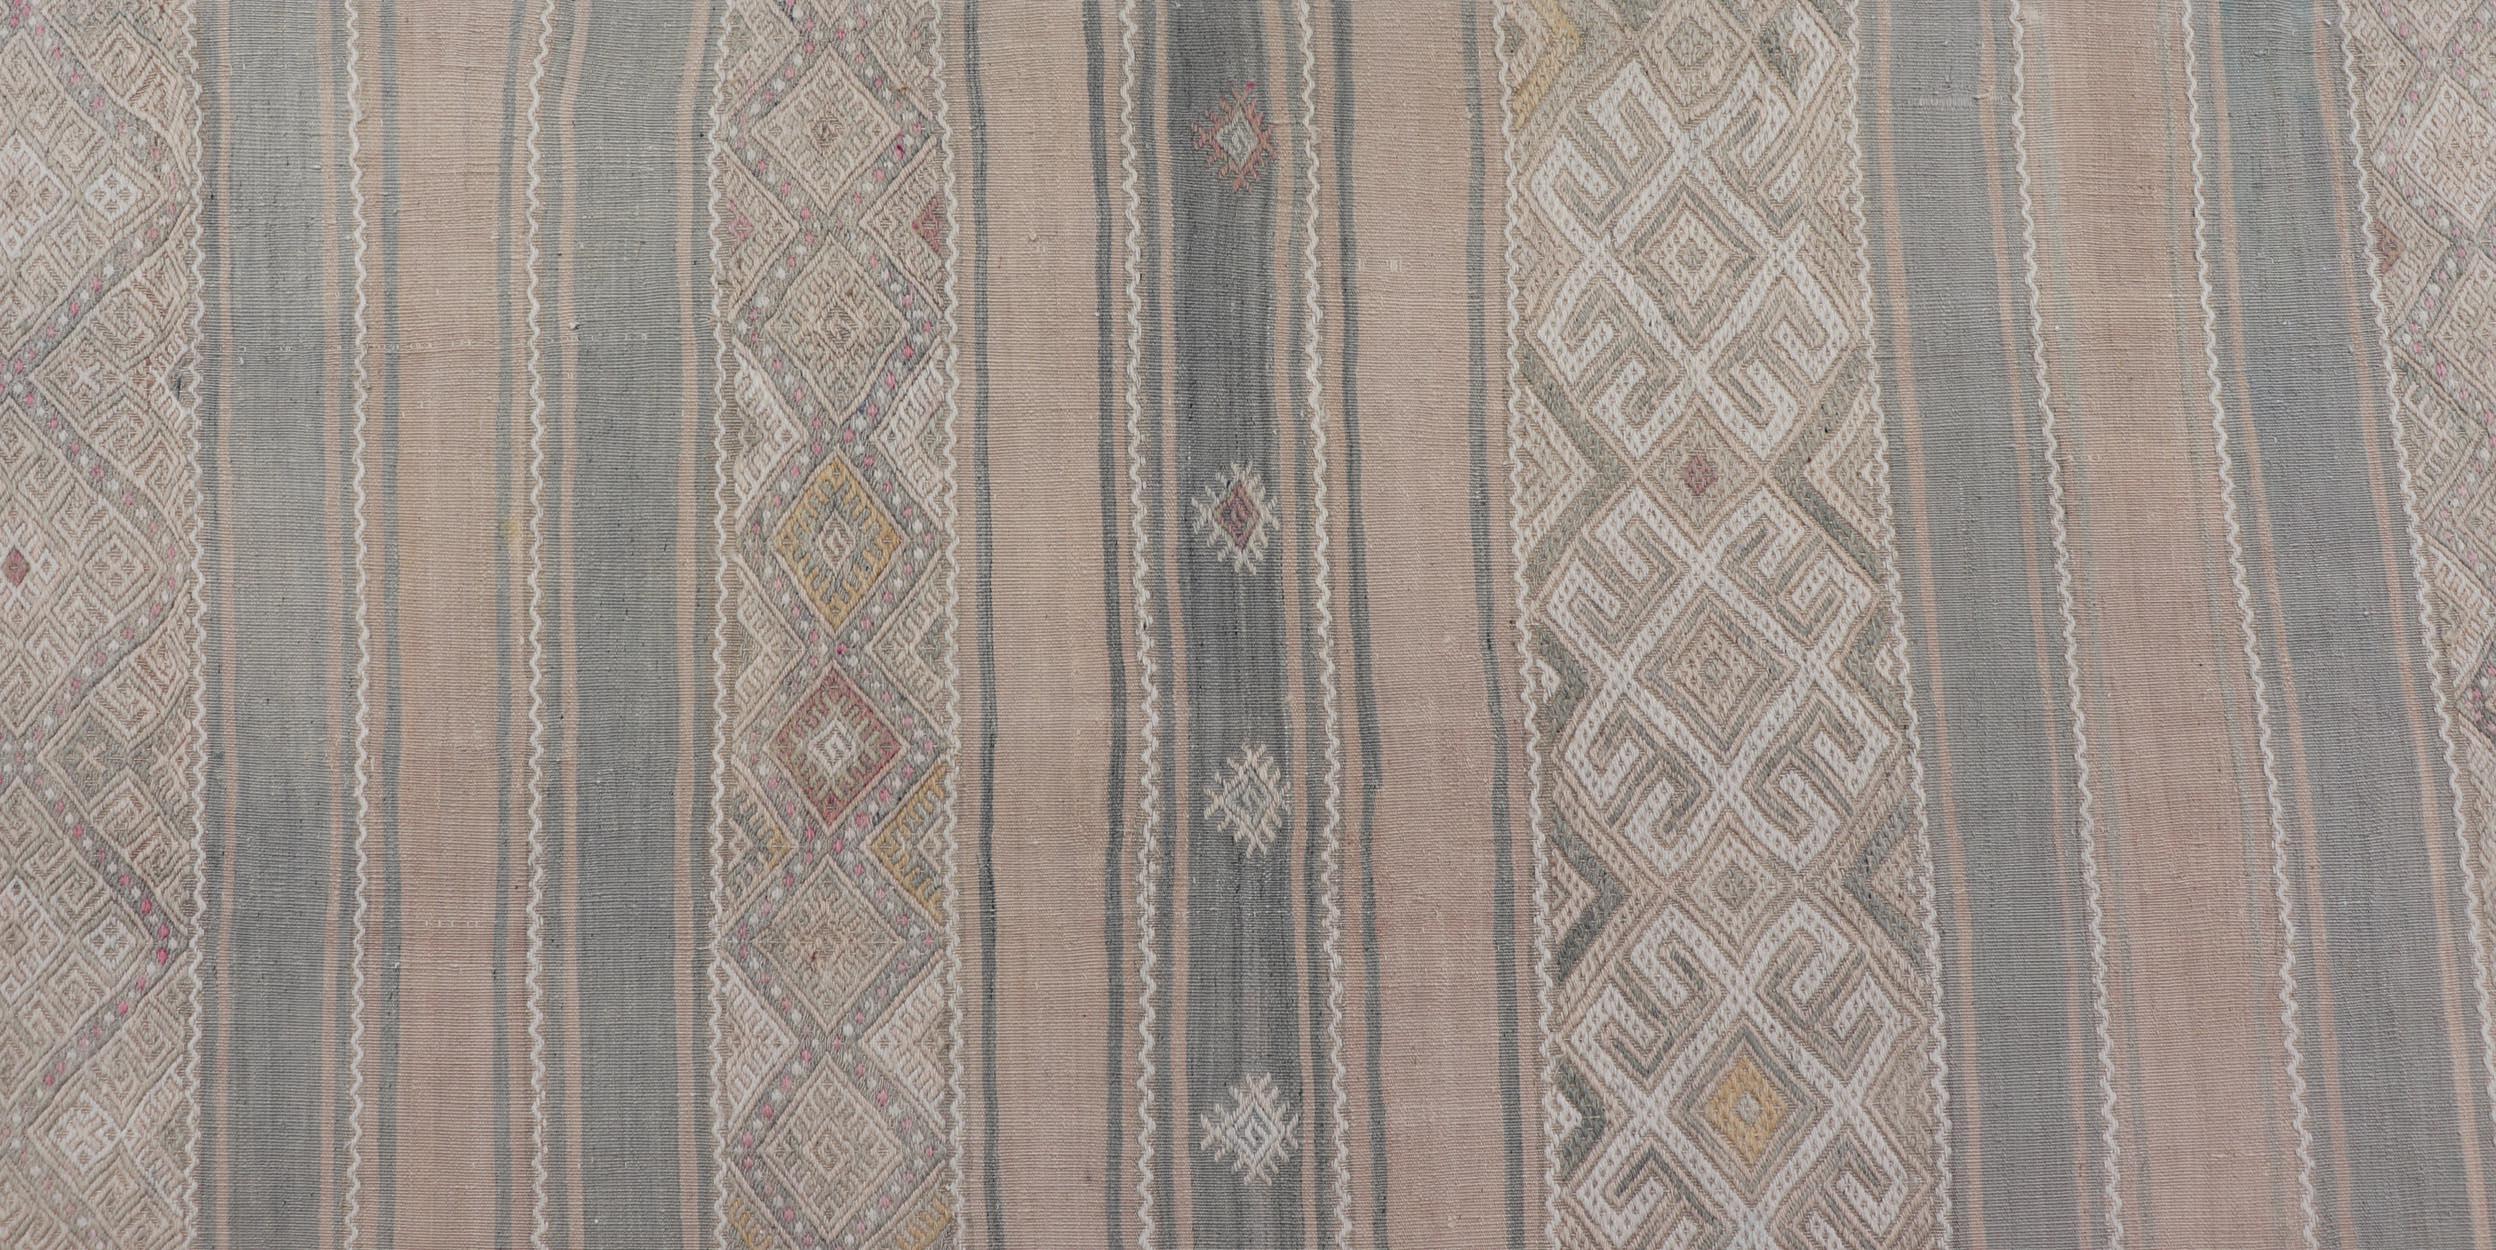 Gallery Vintage Turkish Flat-Weave Kilim with Embroideries in Earthy Tones 4